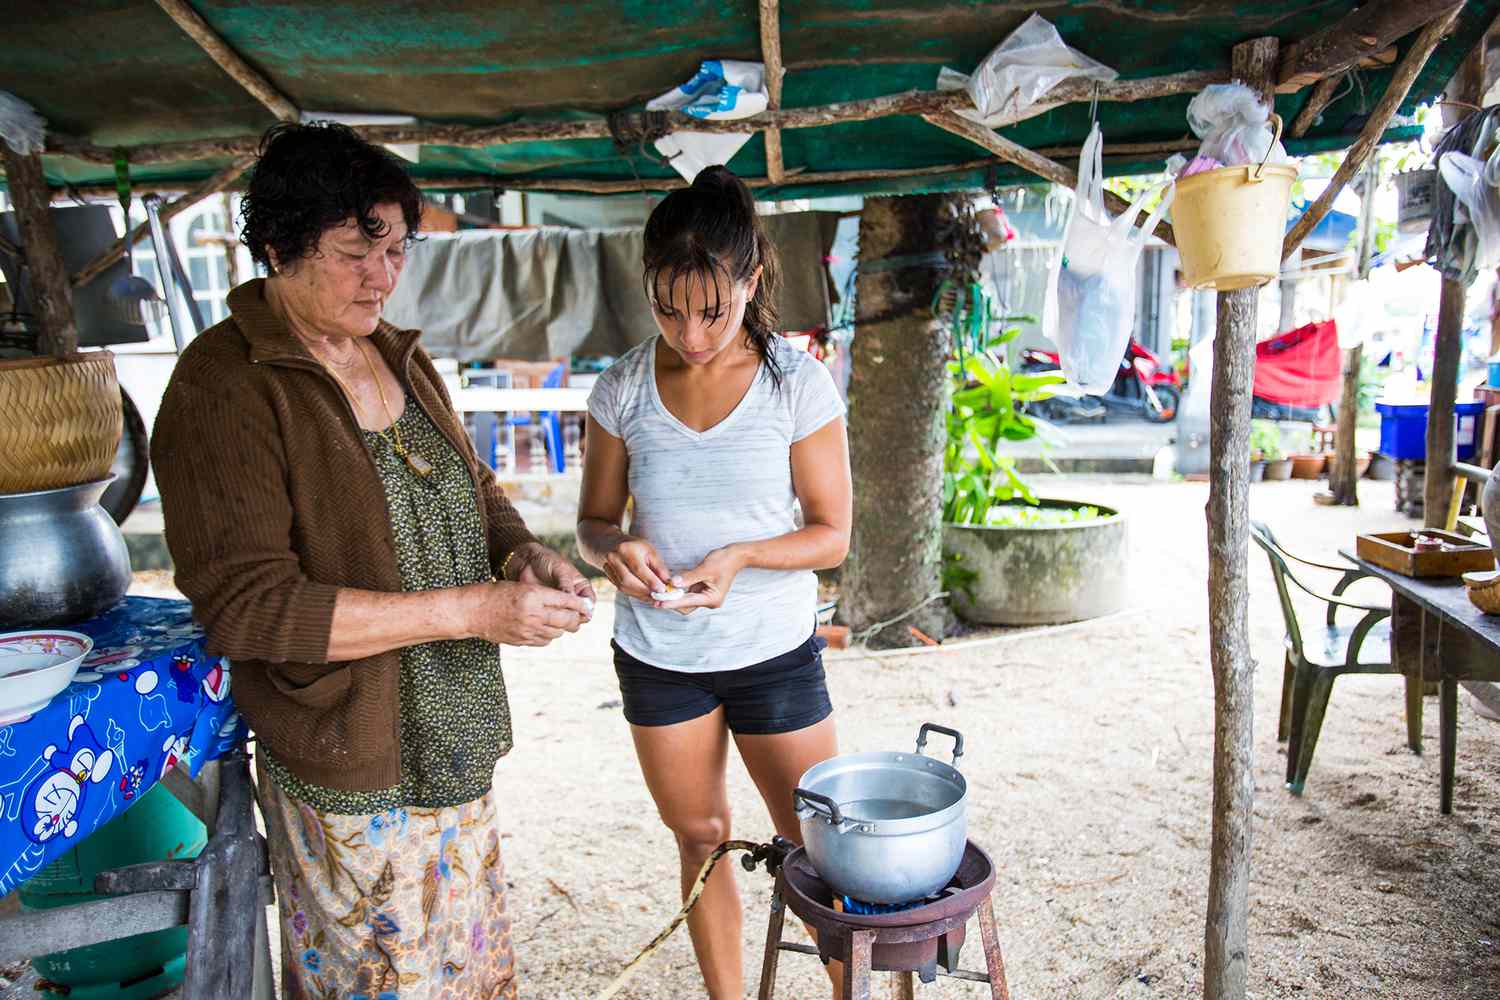 Older and younger woman cooking together in an outdoor kitchen